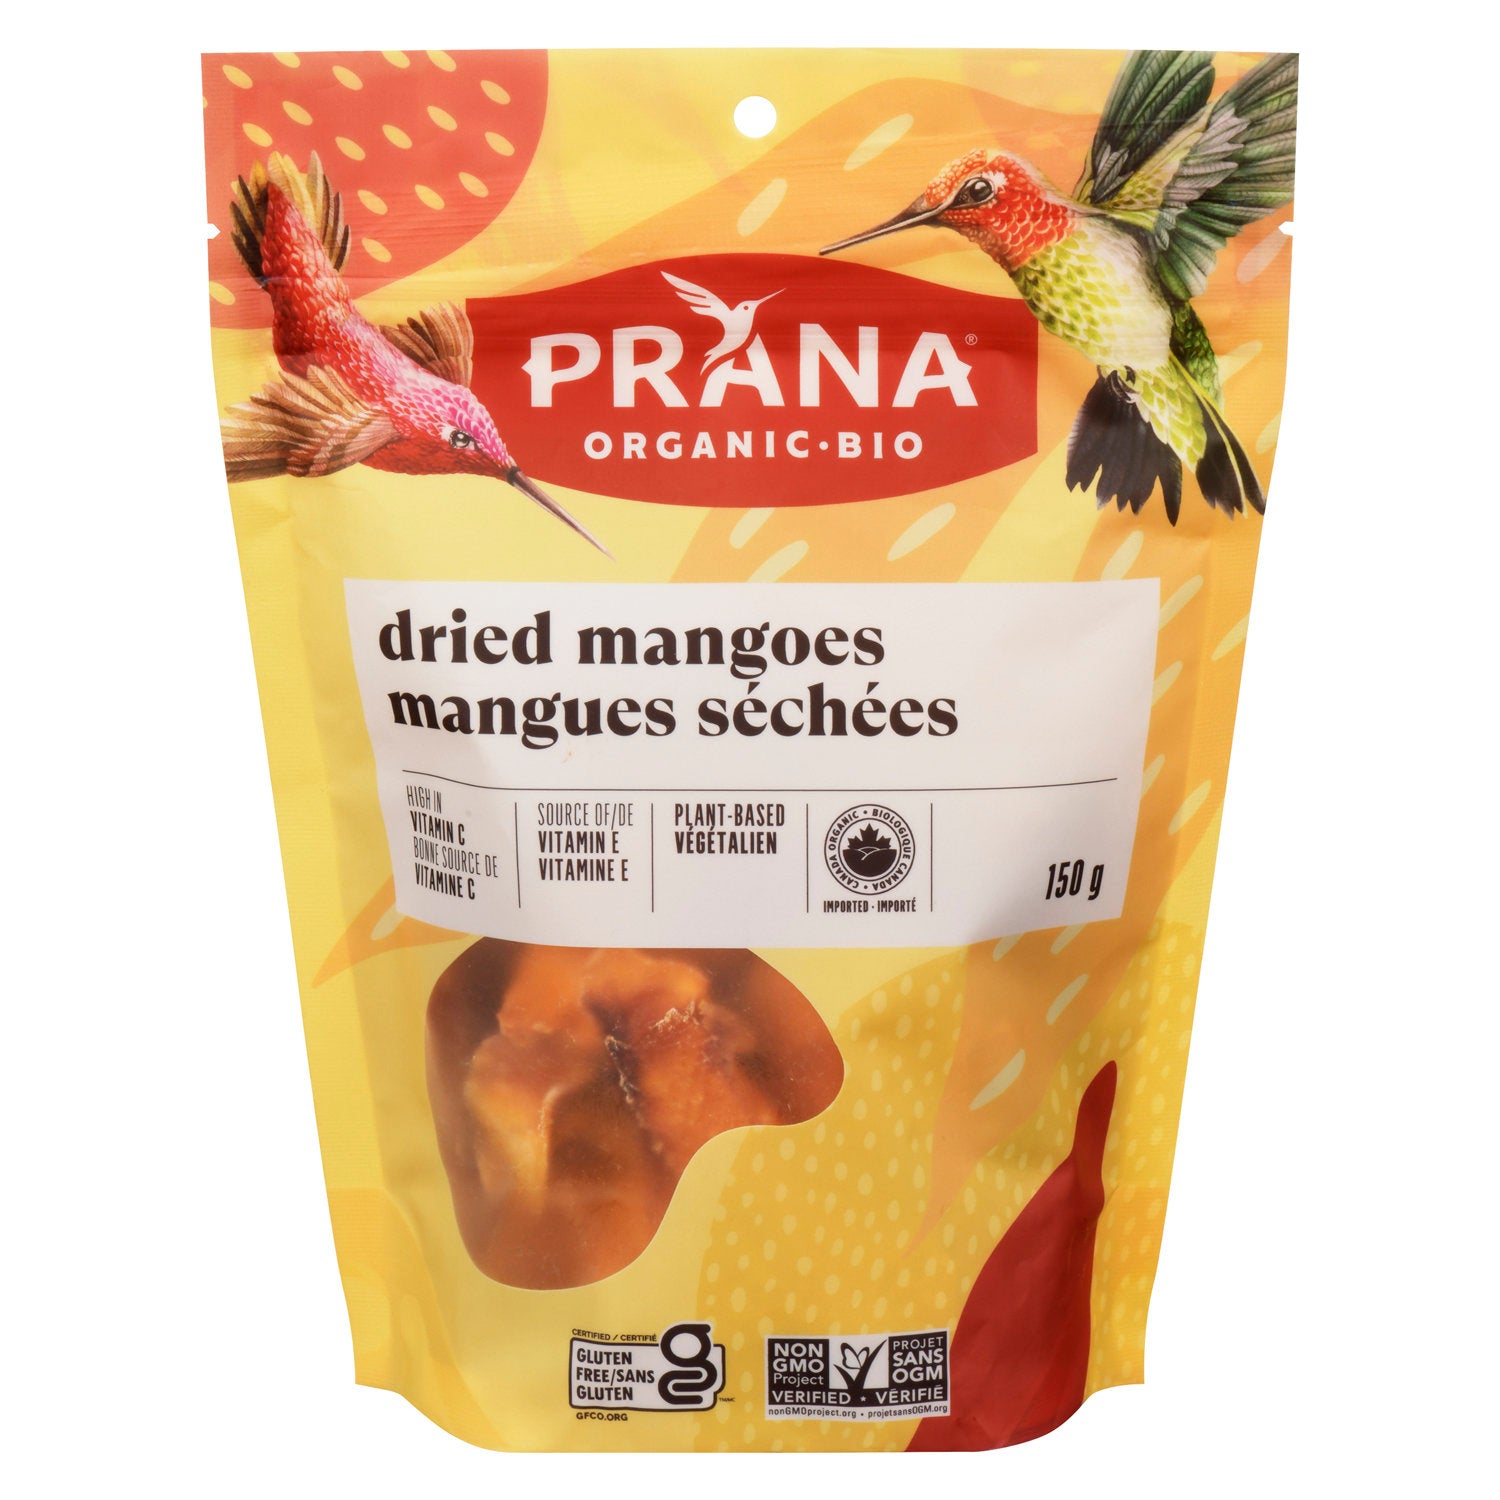 150 gram yellow and red bag of Prana Dried Mangoes